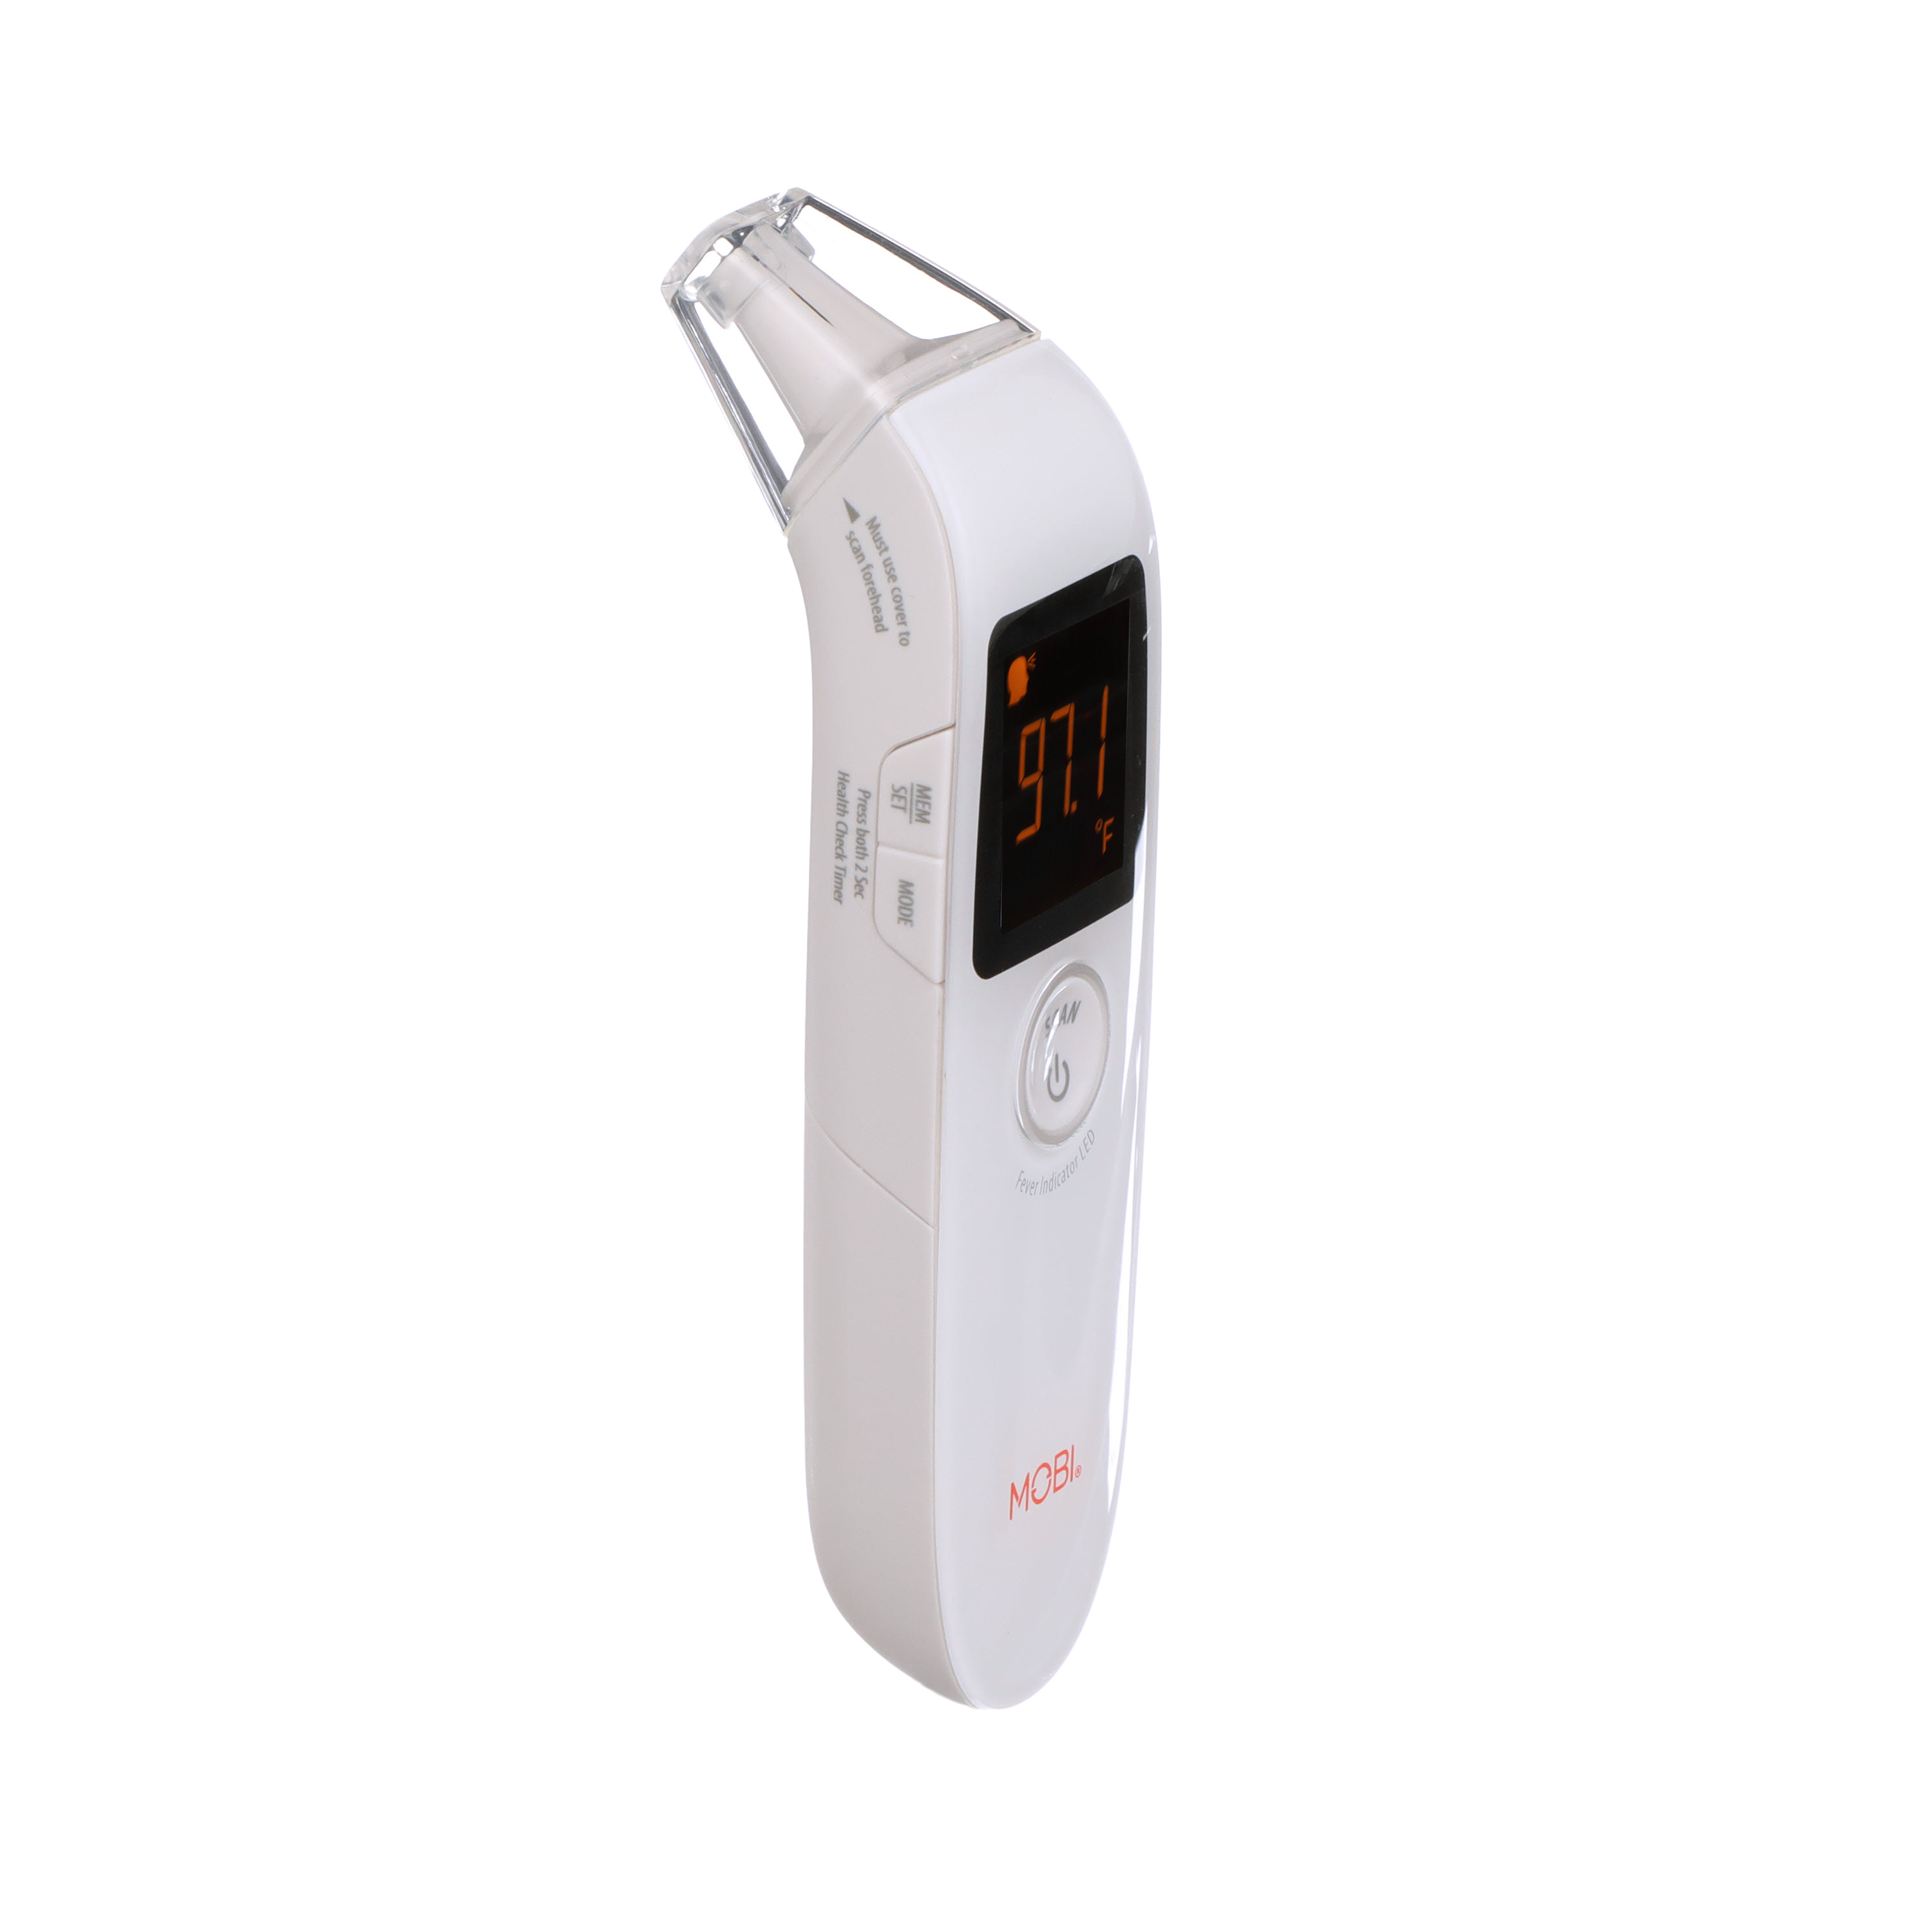 MOBI DualScan FeverTrack Ear & Forehead Medical Grade Thermometer